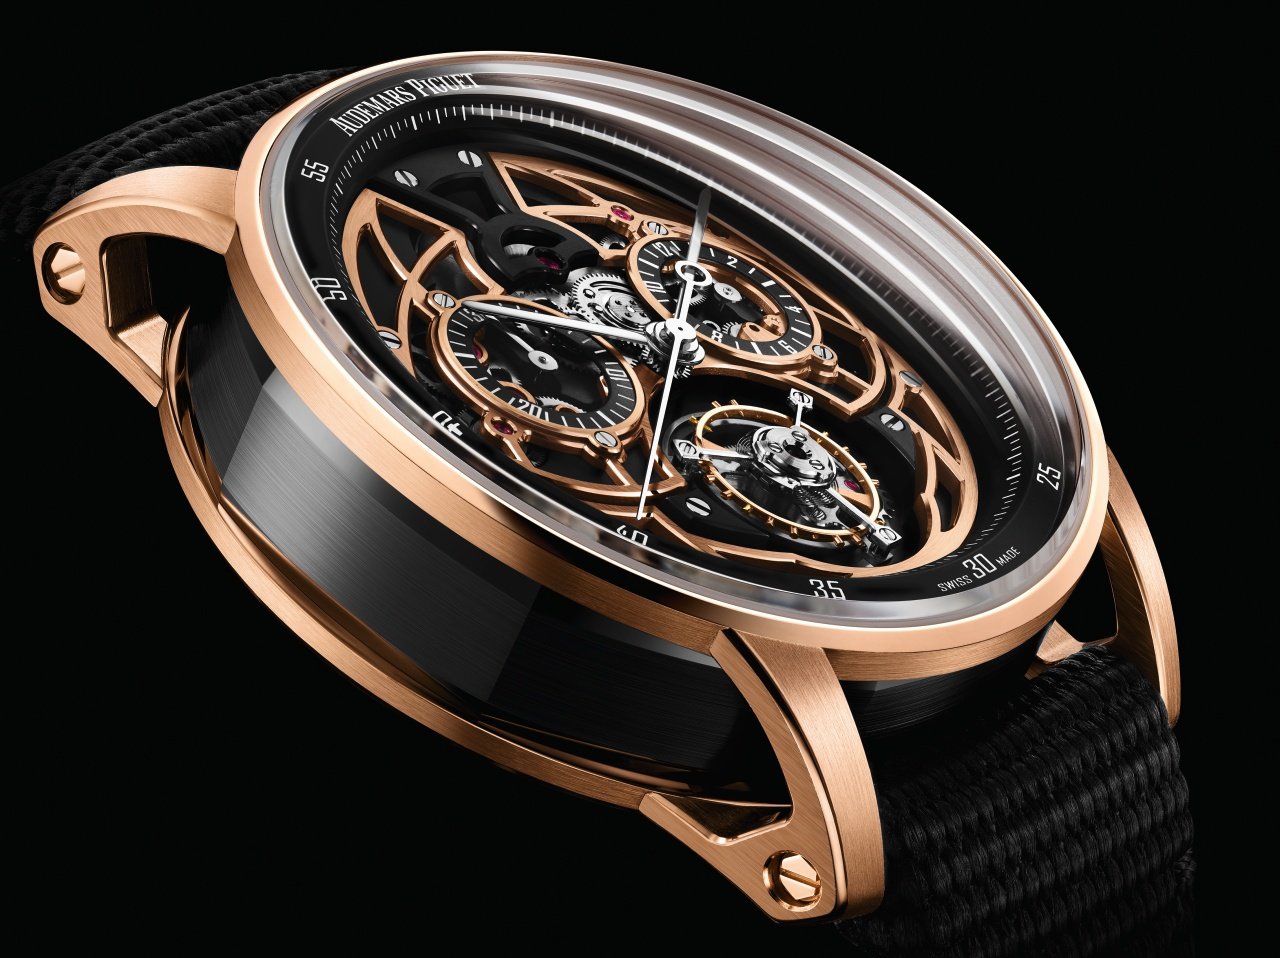 Code 11.59 by Audemars Piguet: introducing new complicated timepieces 